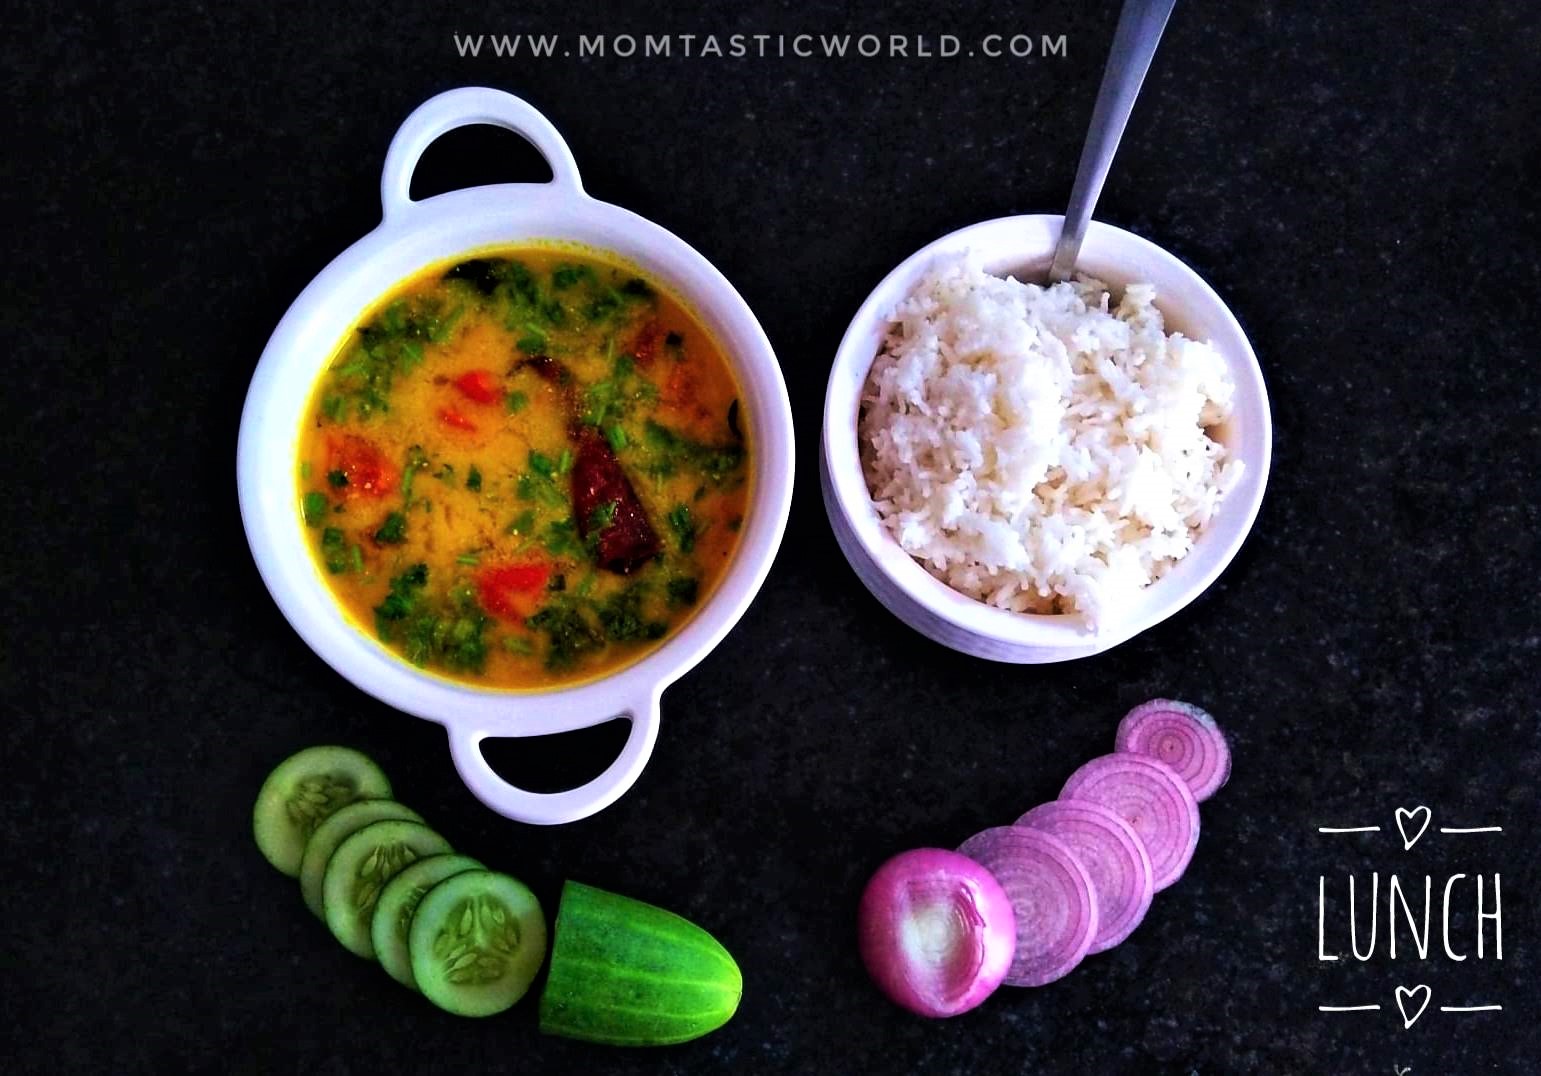 Easy and healthy Lunch ideas #Kadhirecipe